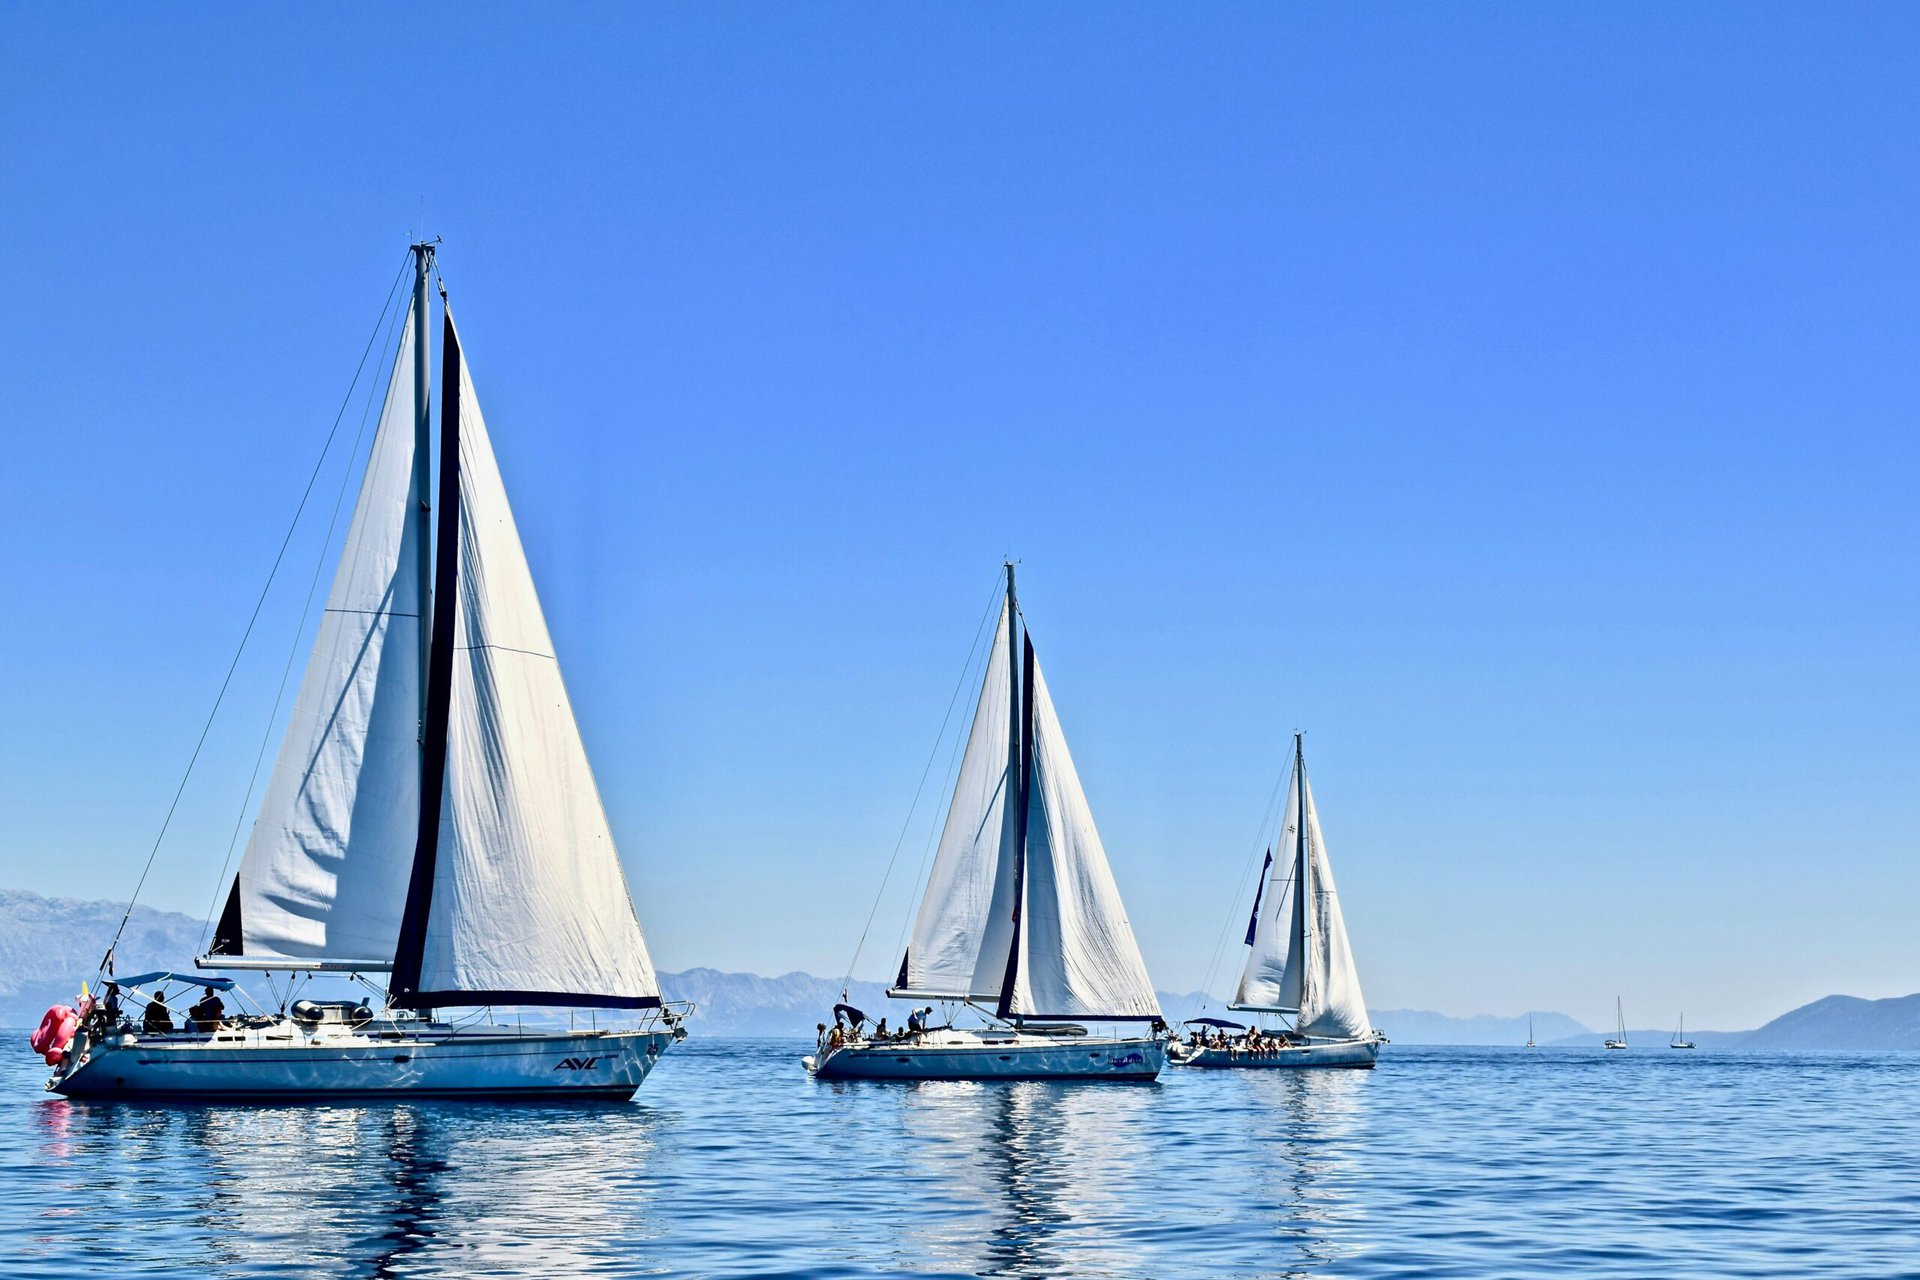 Three sailboats with white sails glide on a calm, blue sea under a clear sky. In the distance, mountainous terrain is faintly visible. The water reflects the sailboats, hinting at the serene and peaceful conditions of the scene.